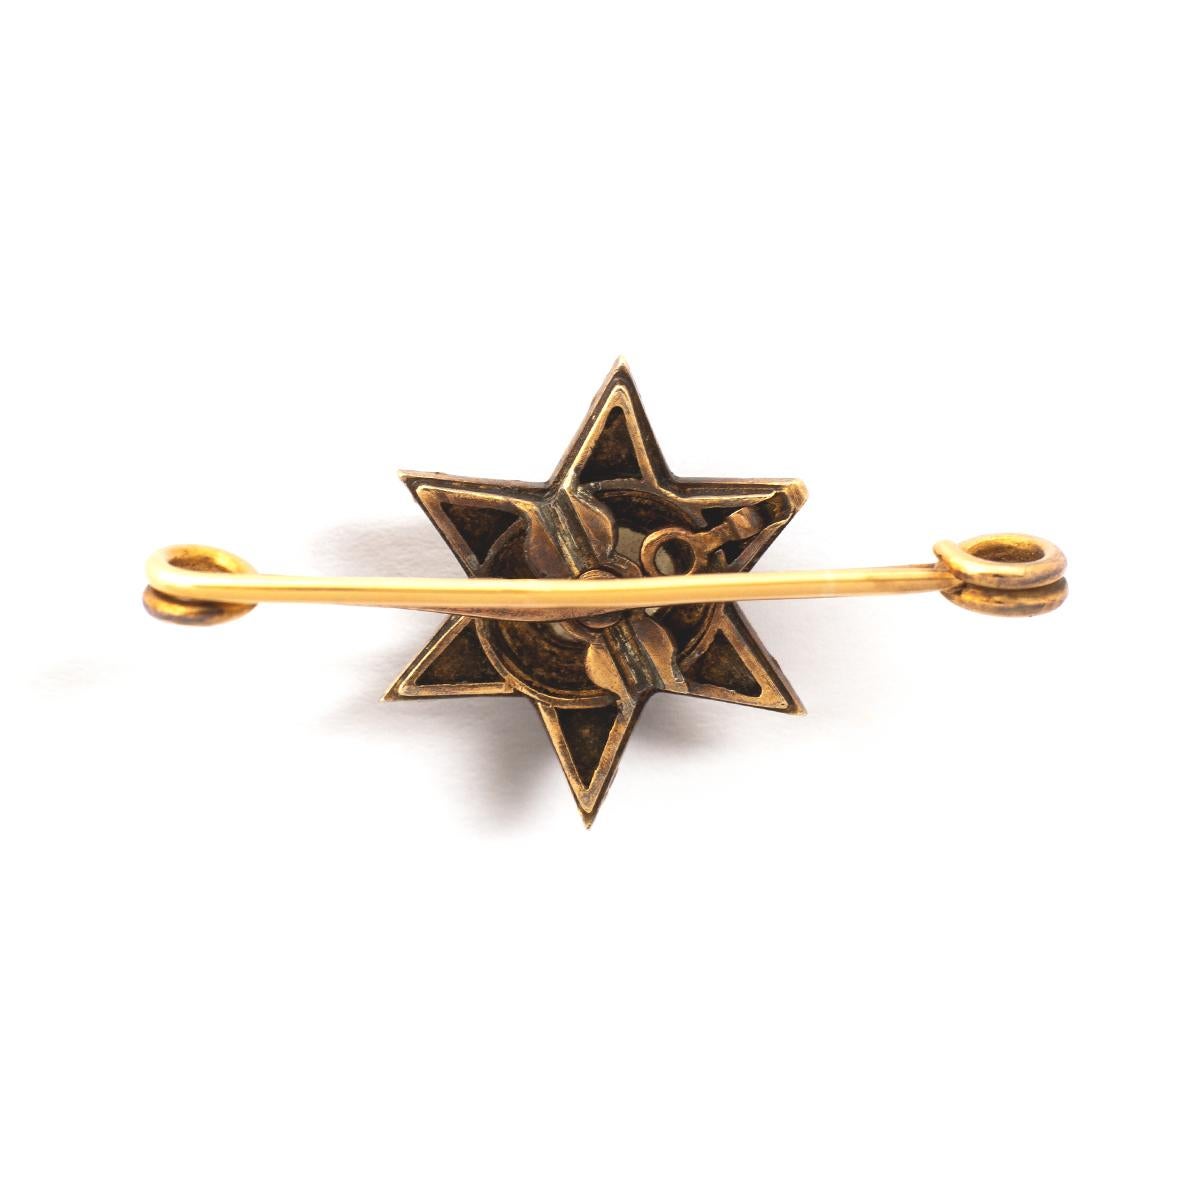 Antique yellow gold Star Brooch set by Rose cut Diamonds and centered by a significant Rose cut Diamond white and clean.
